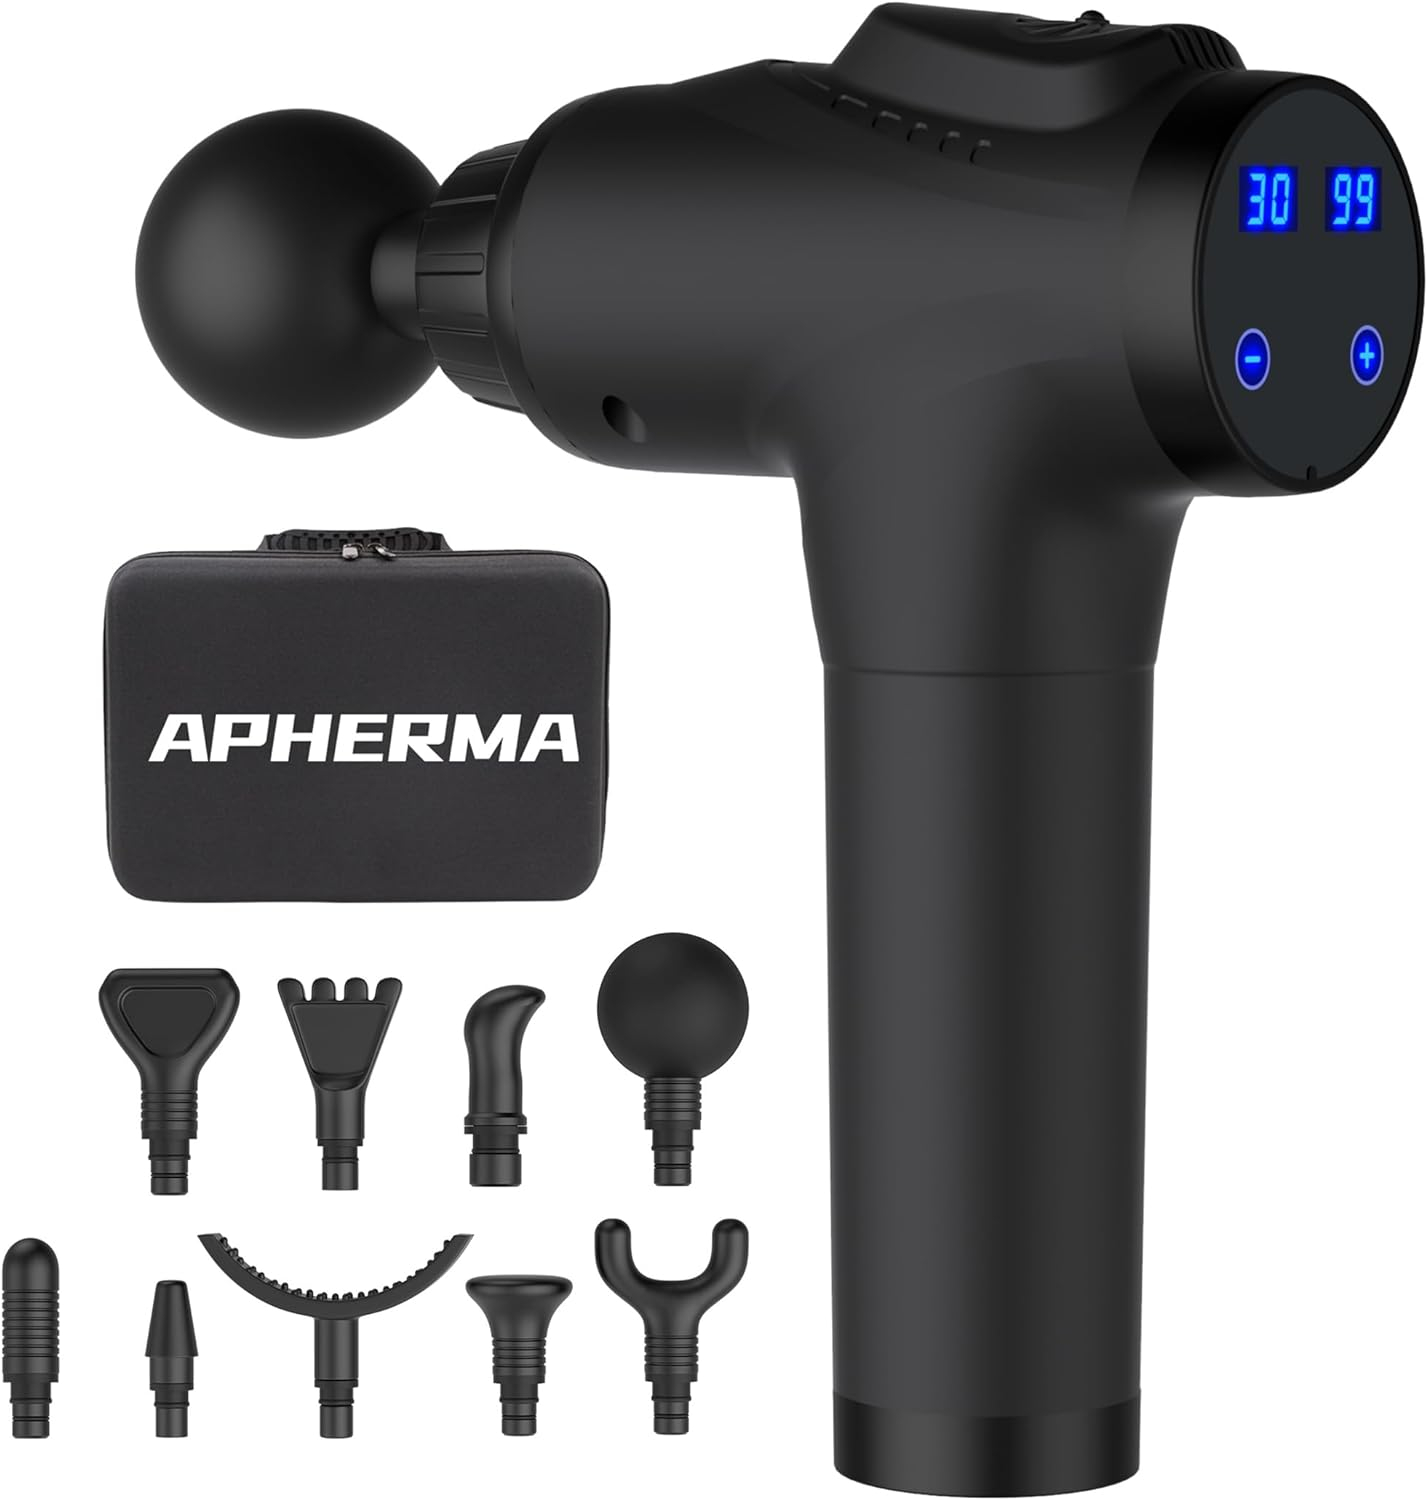 APHERMA Massage Gun, Muscle Massage Gun for Athletes Handheld Electric Deep Tissue Back Massager, Percussion Massage Device for Pain Relief with 30 Speed Levels 9 Heads